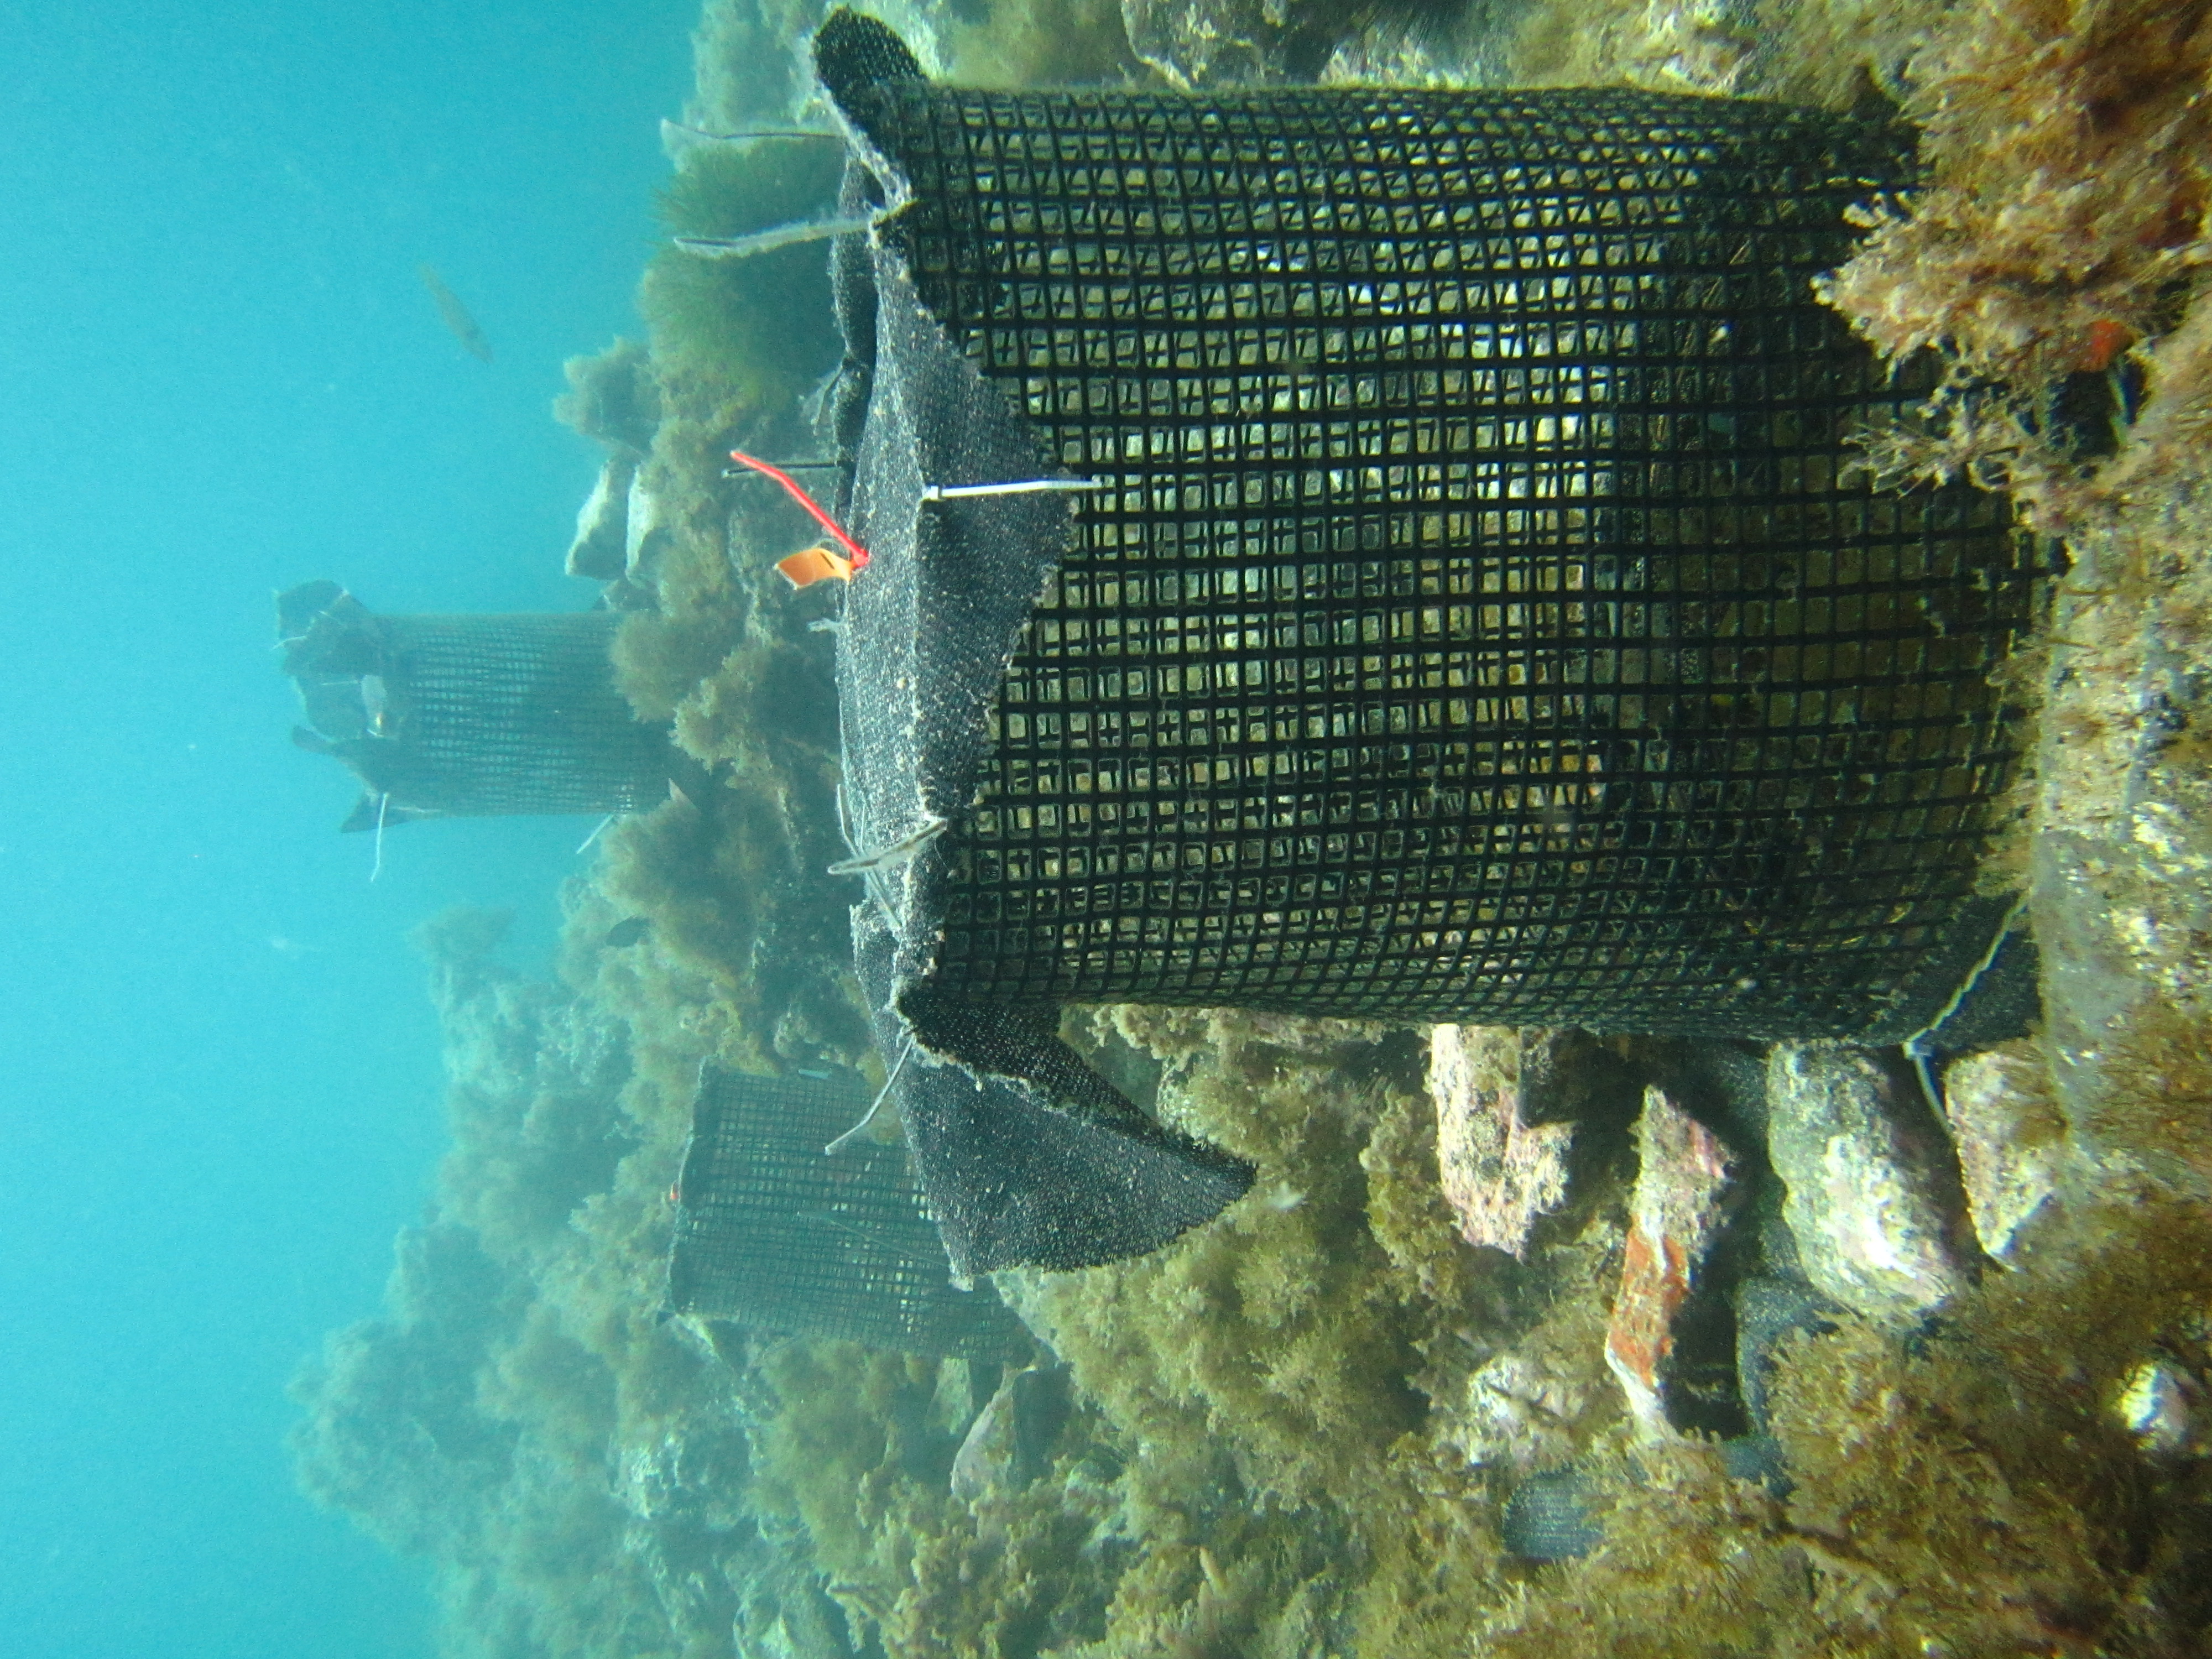 underwater cages with algae on a rocky reef